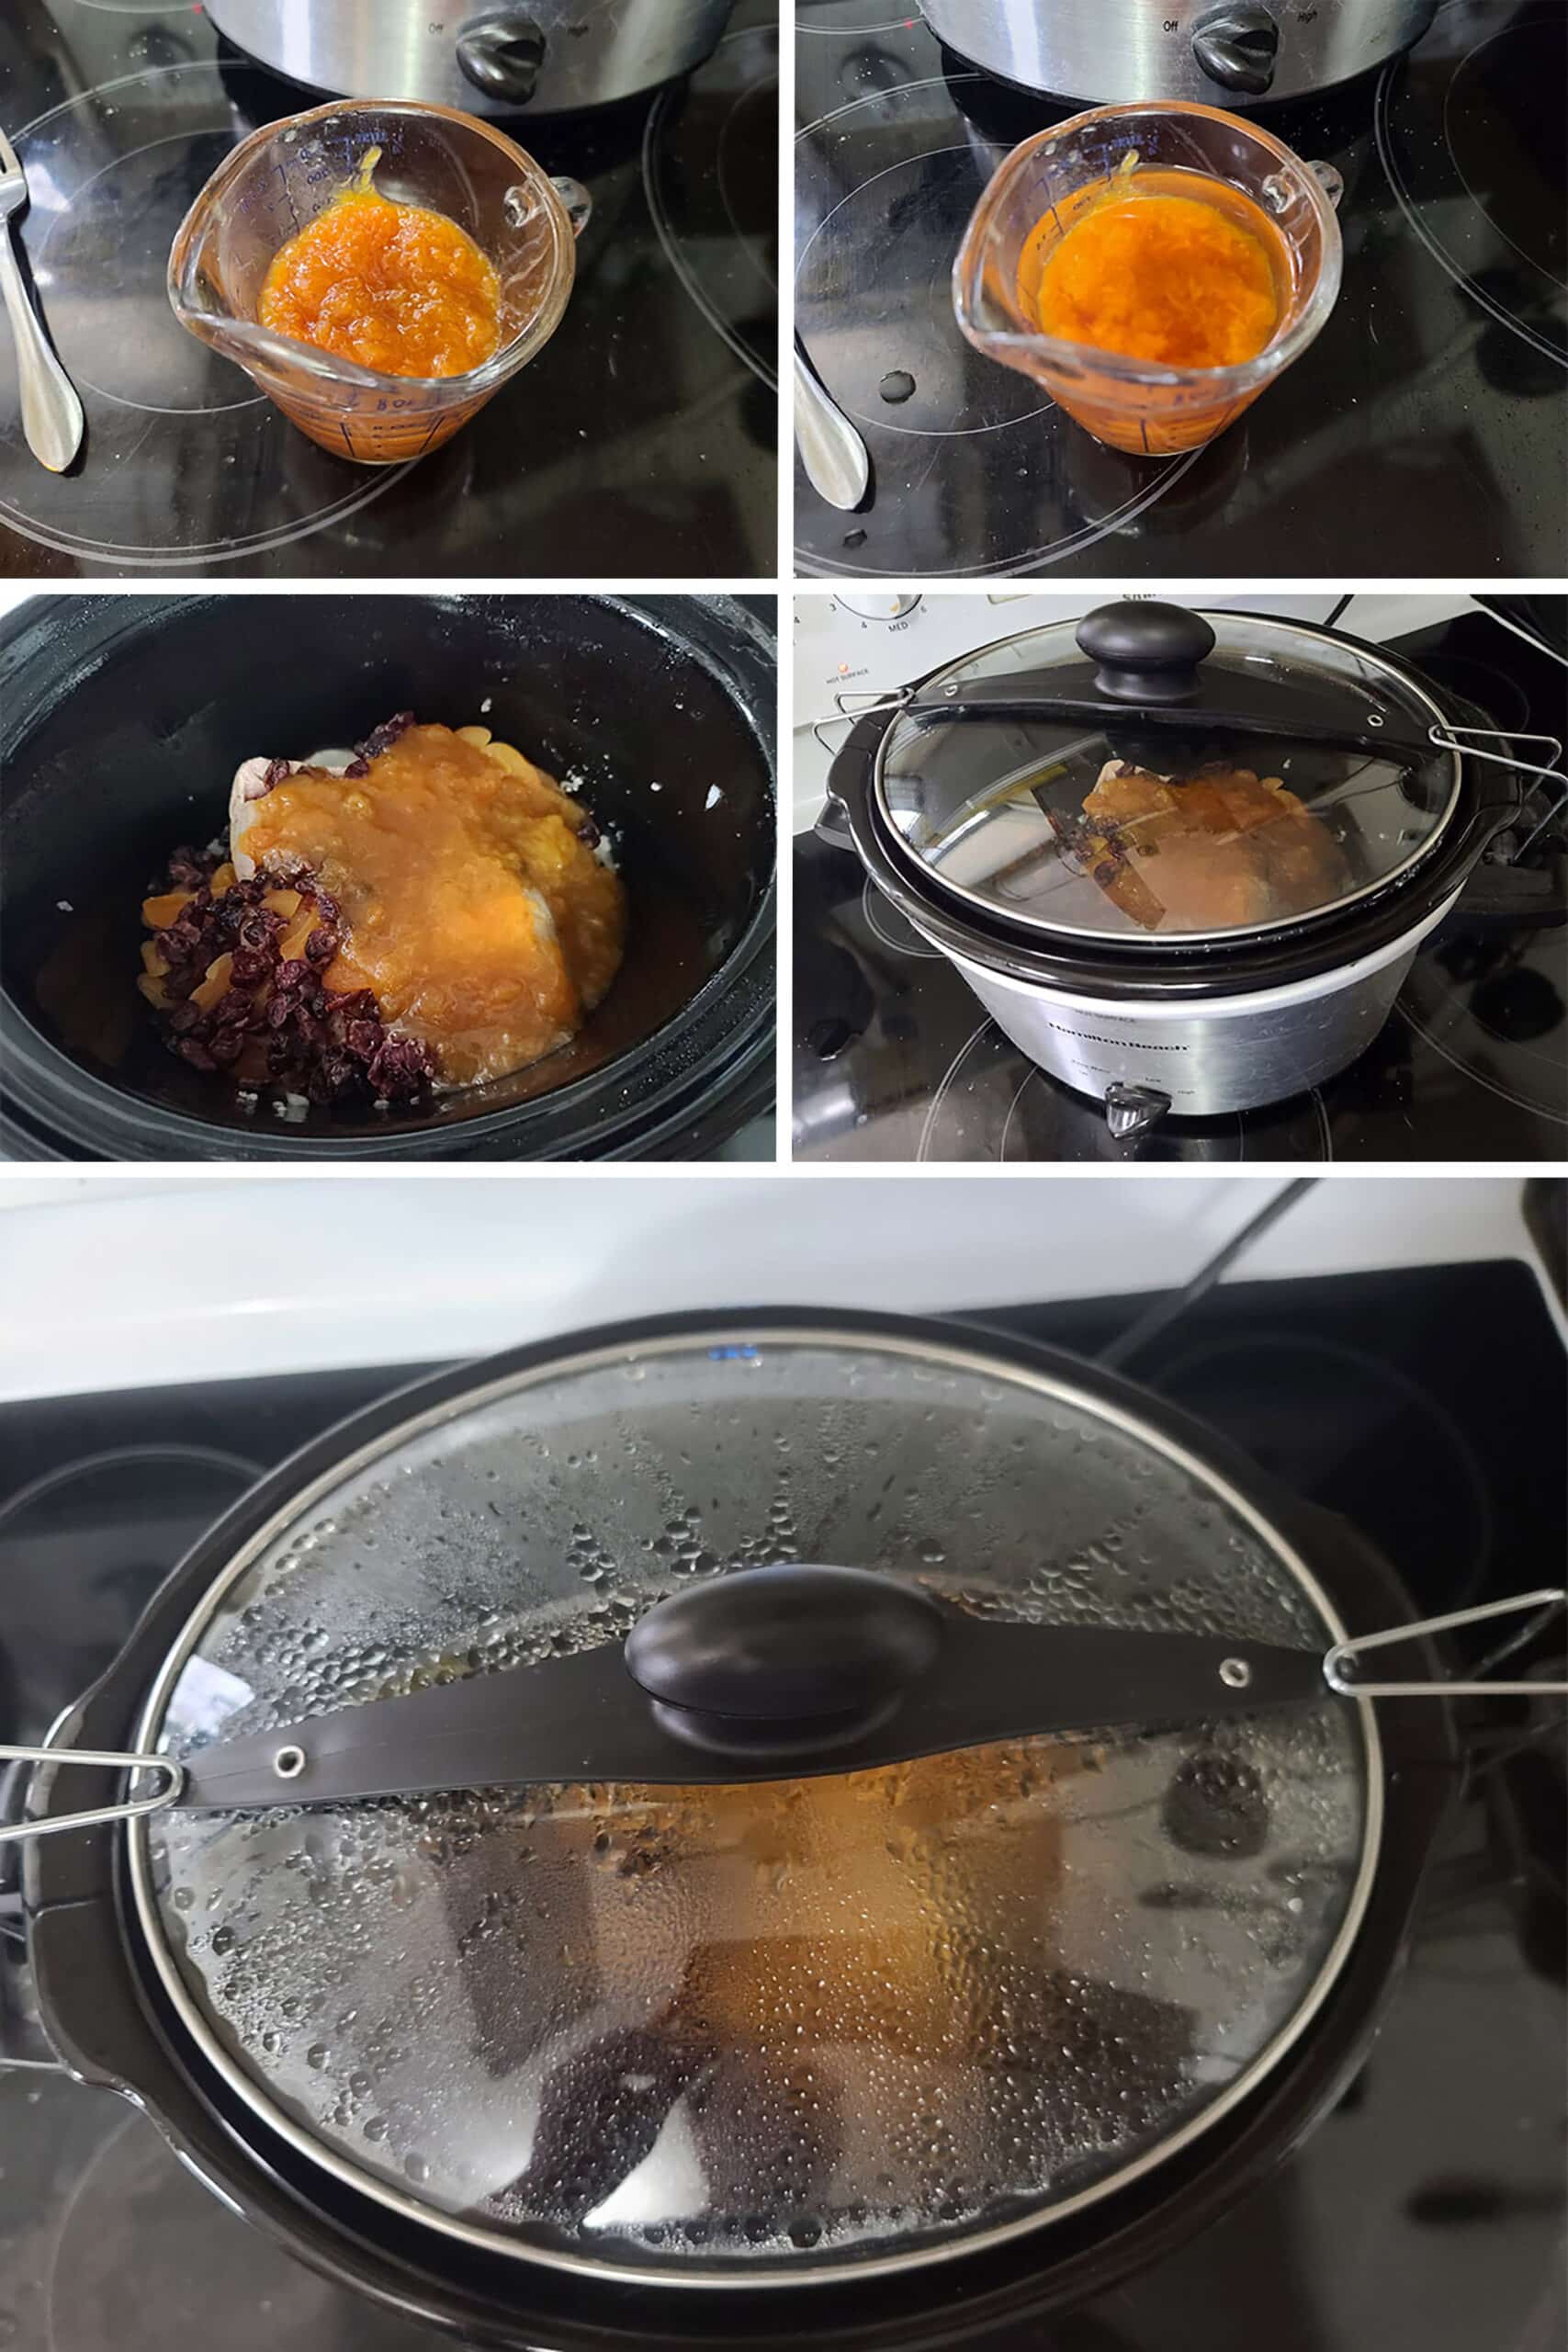 5 part image showing the fruit sauce being whisked together and poured over the pork loin. The dried fruit is added, and the cover secured on the slow cooker.